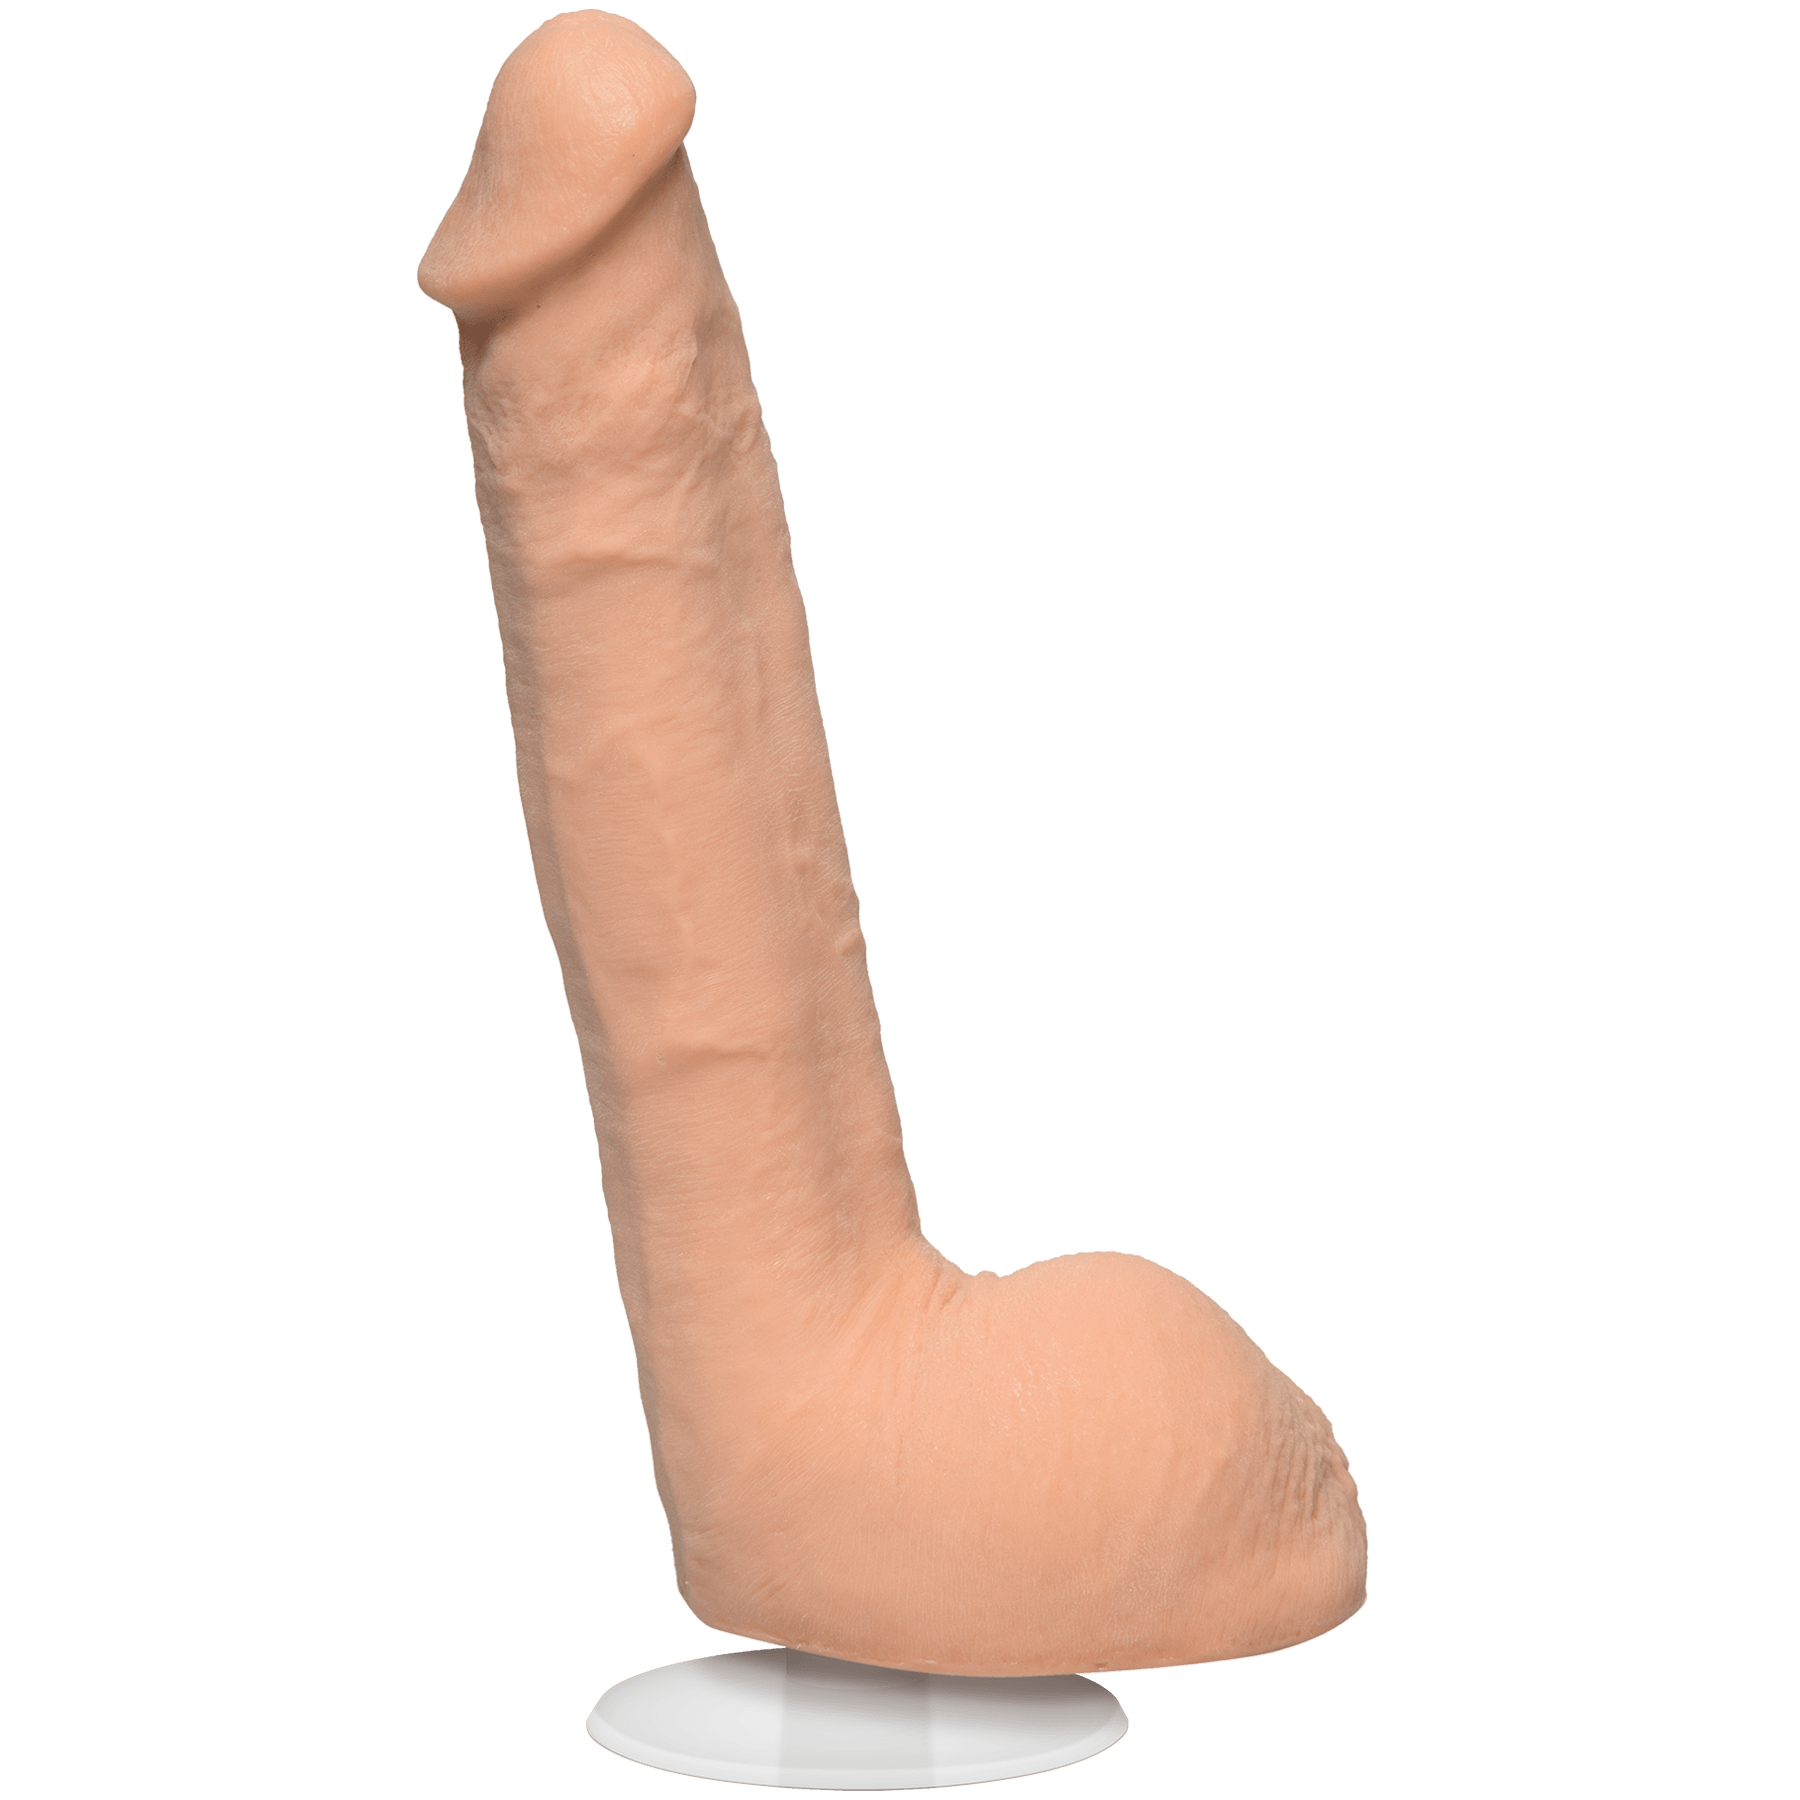 Doc Johnson Signature Cocks Small Hands 9in Cock - Buy At Luxury Toy X - Free 3-Day Shipping